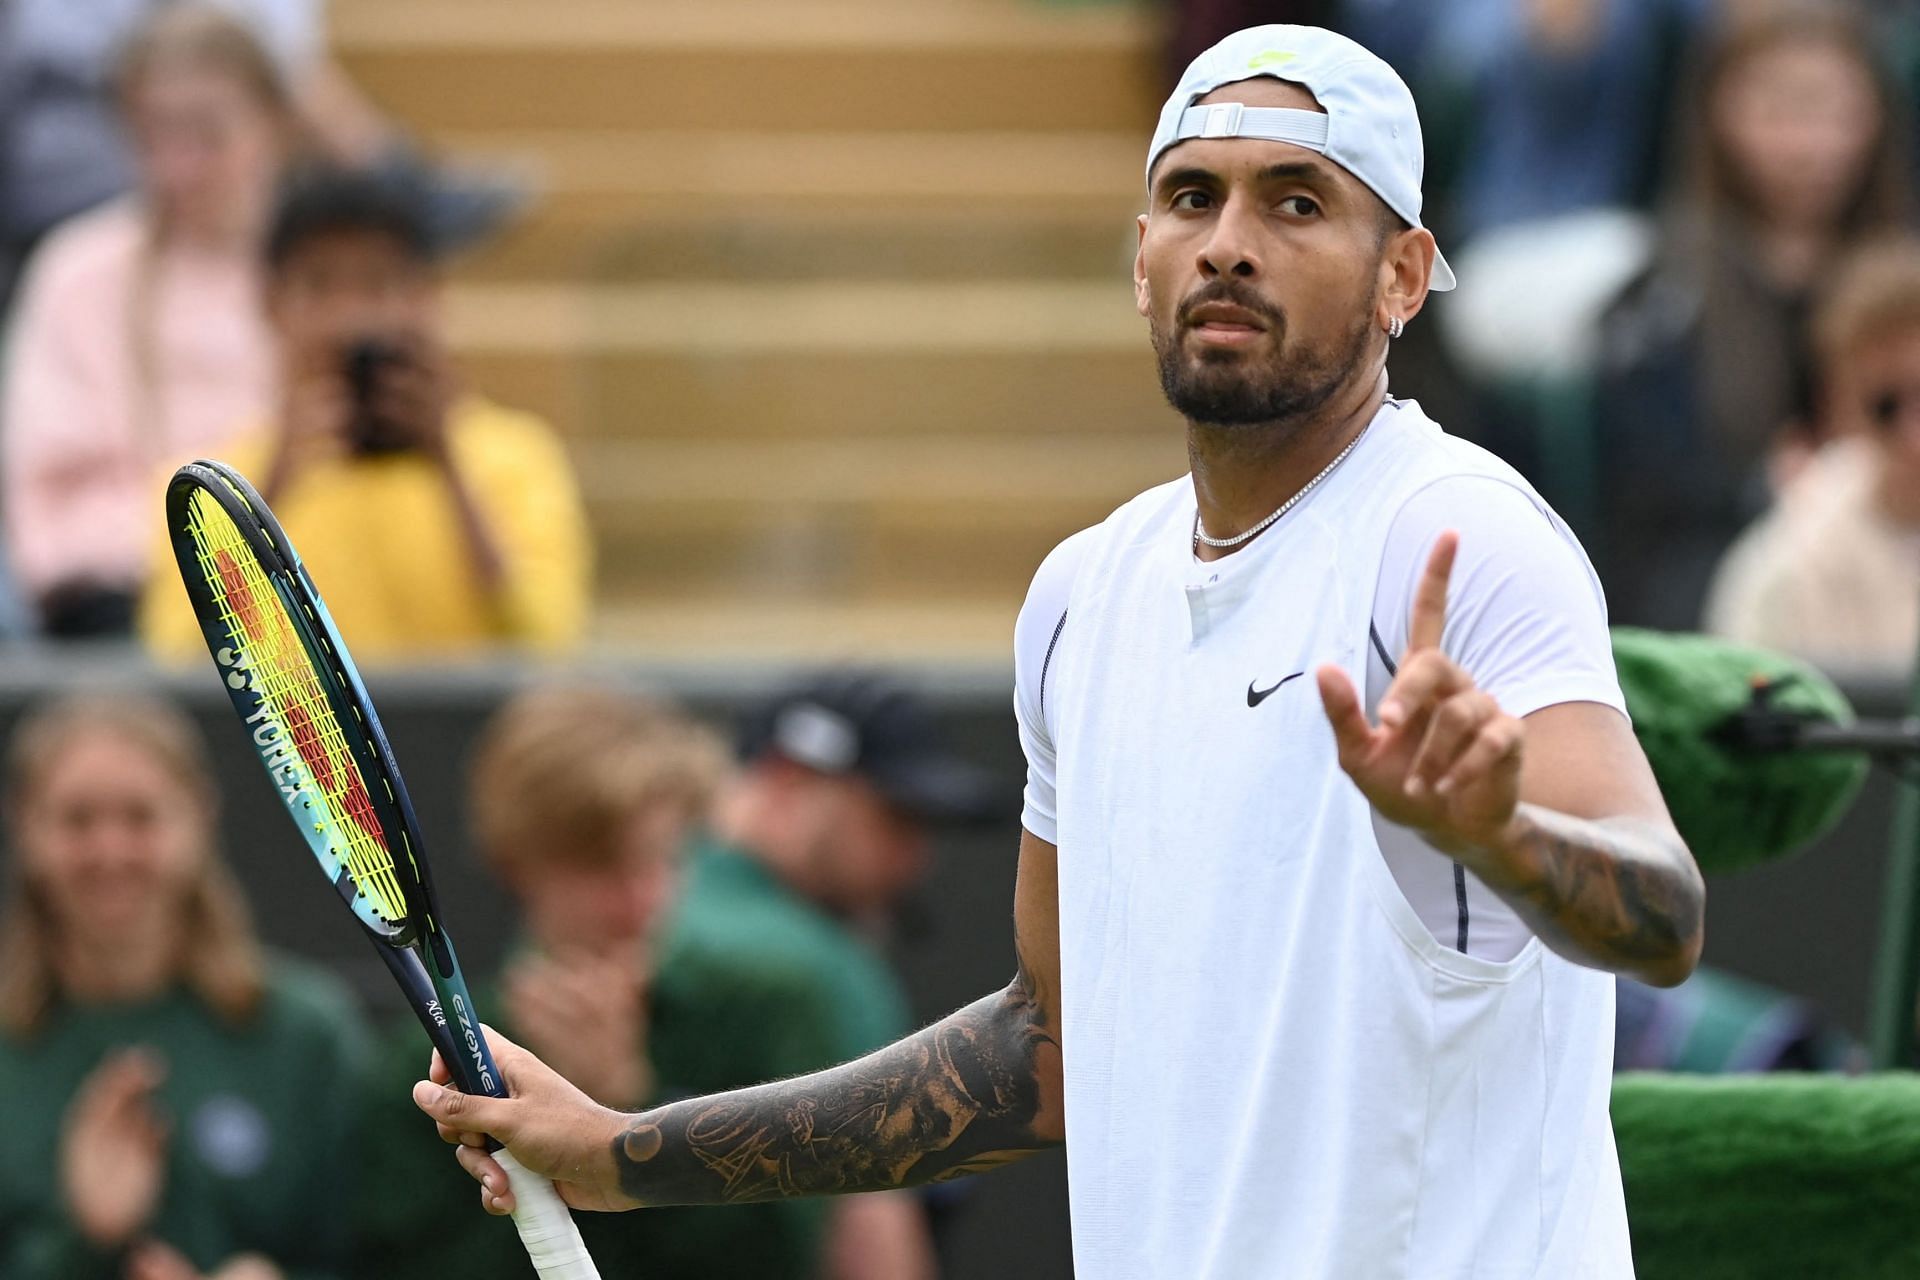 Kyrgios finished as the runner-up to Djokovic at the 2022 Wimbledon Championships.